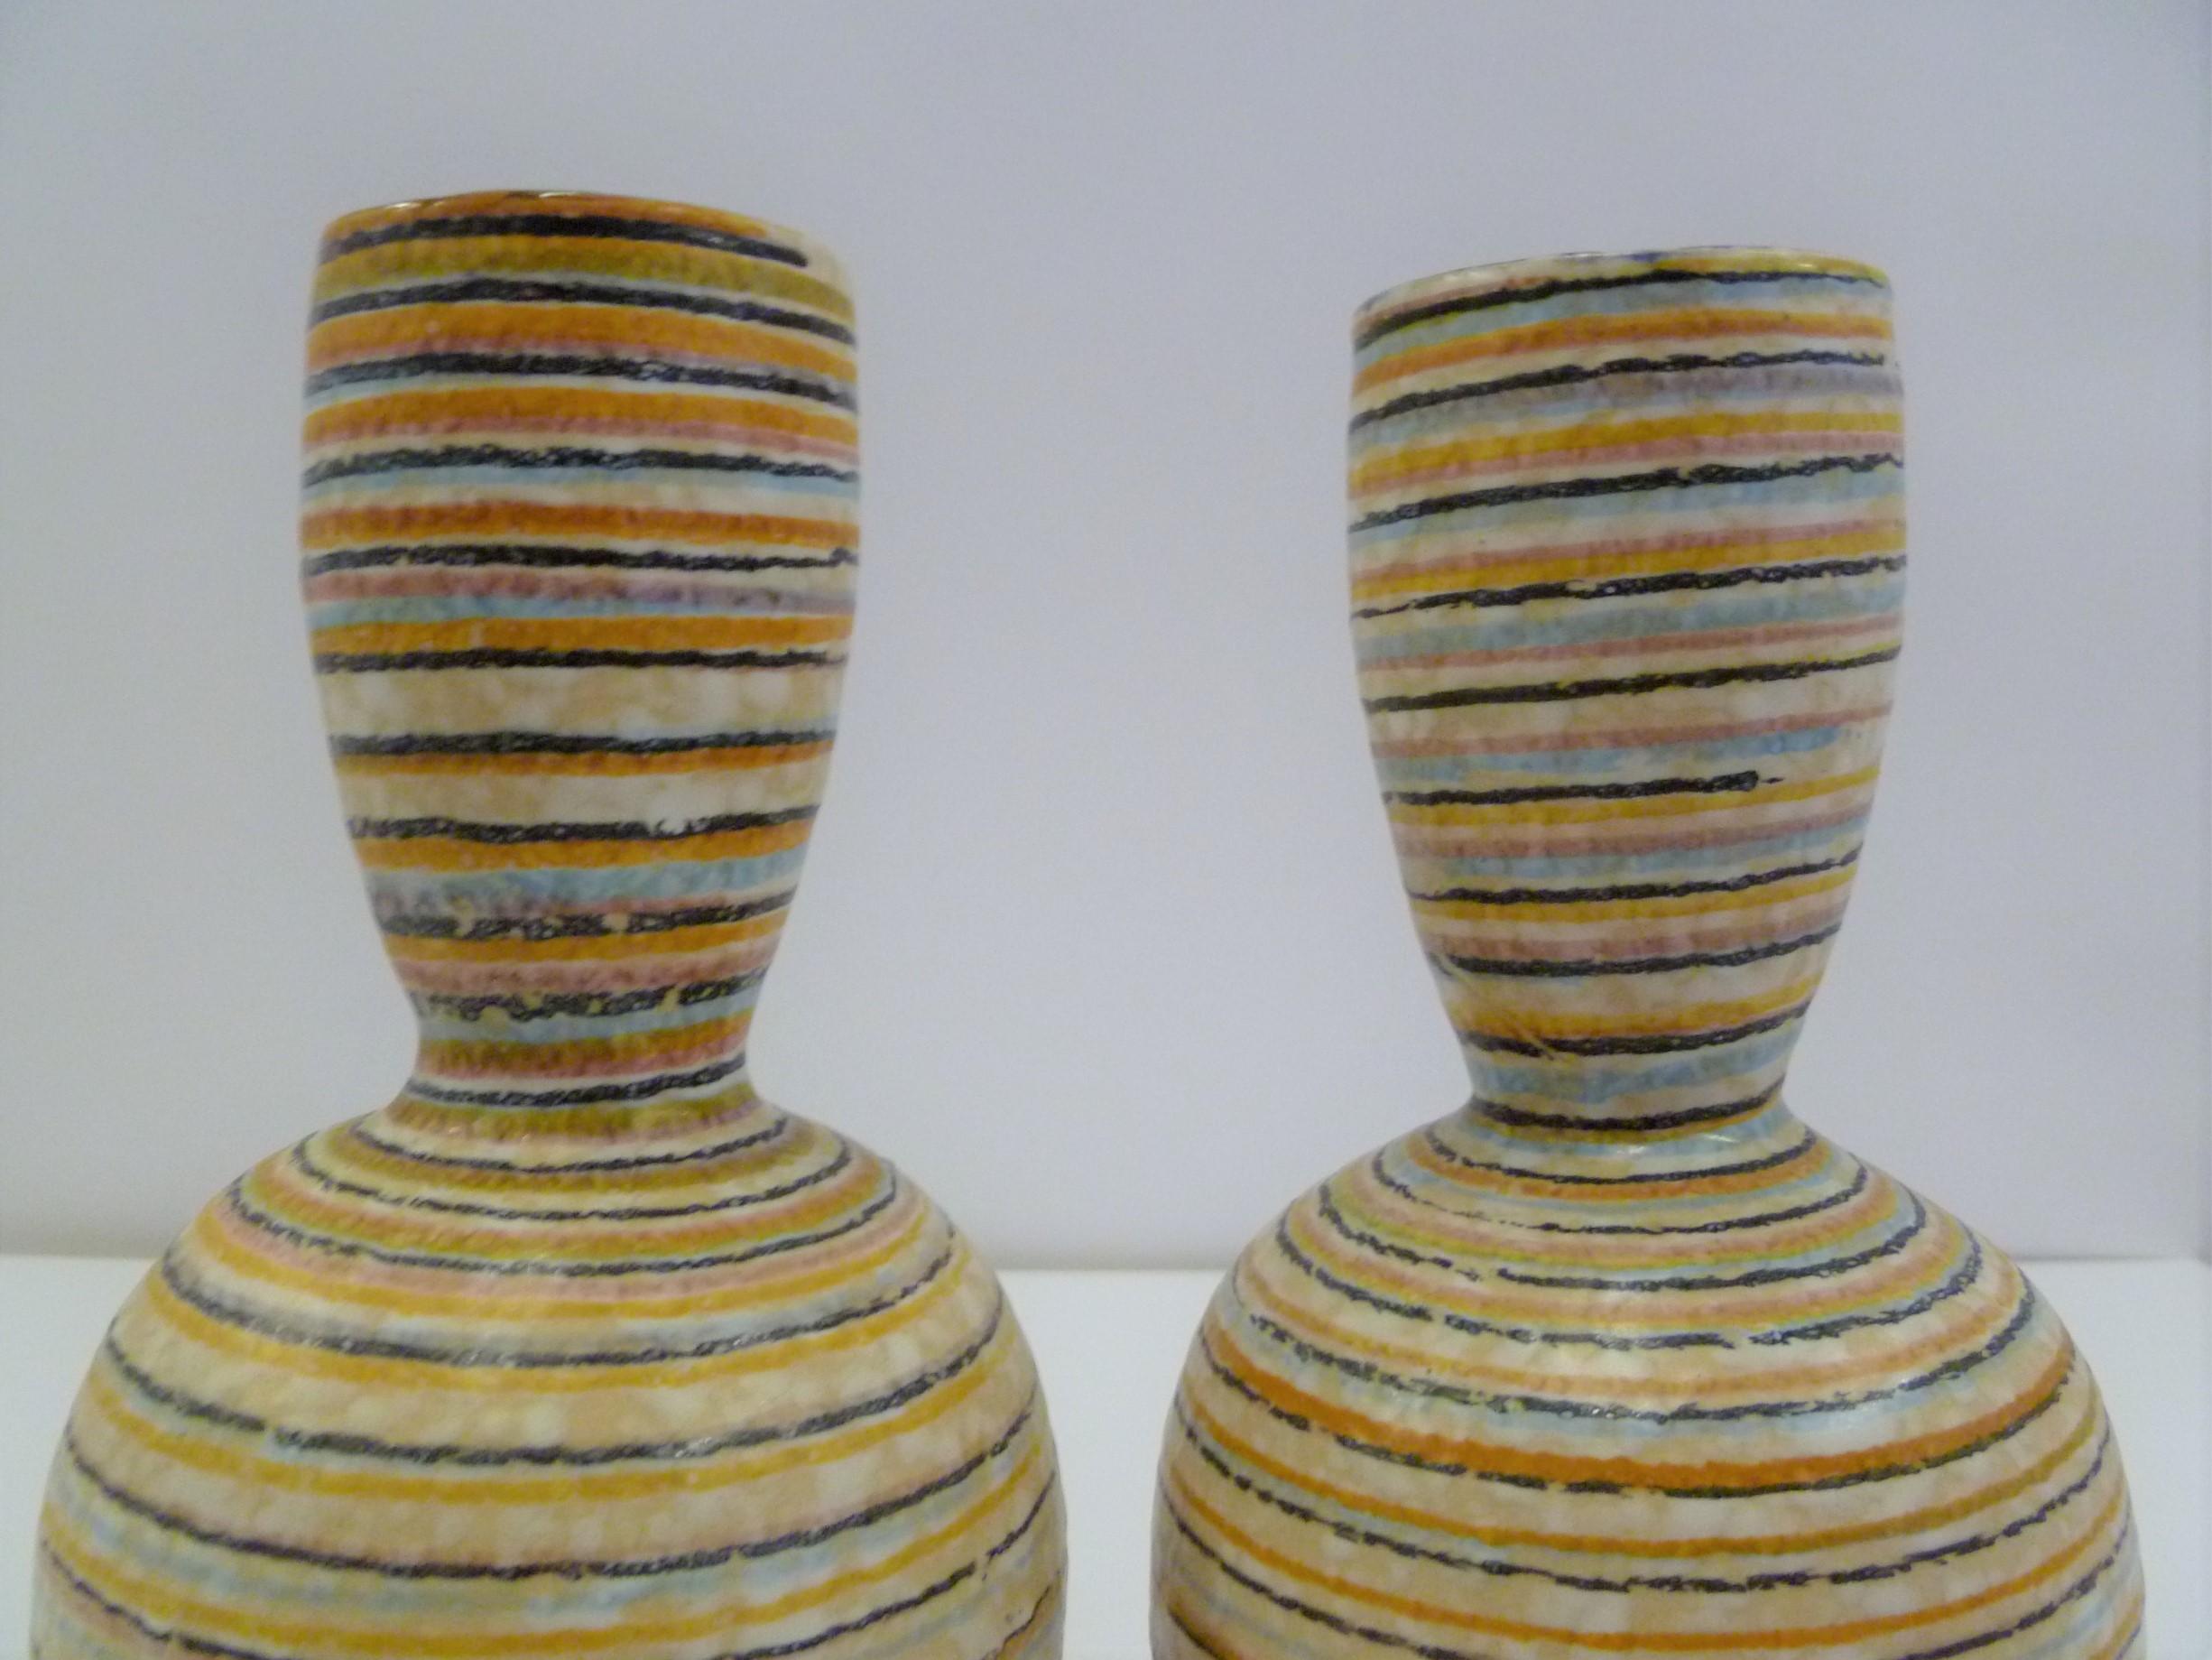 Mid-20th Century Handmade Italian Modern Striped Pottery Vases Retailed by Guildcraft 1960s, Pair